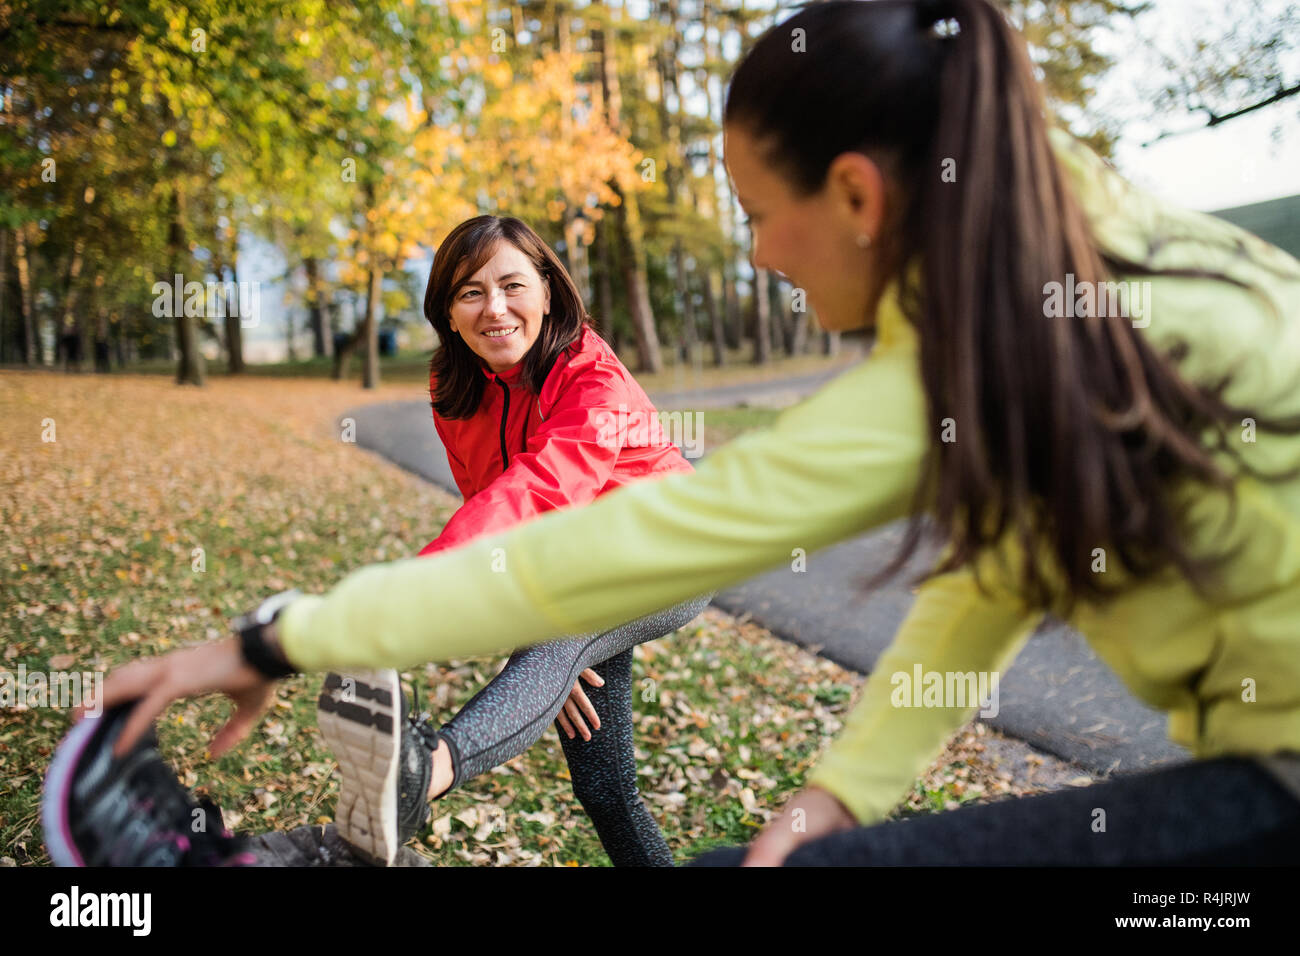 Two female runners stretching legs outdoors in park in autumn nature. Stock Photo